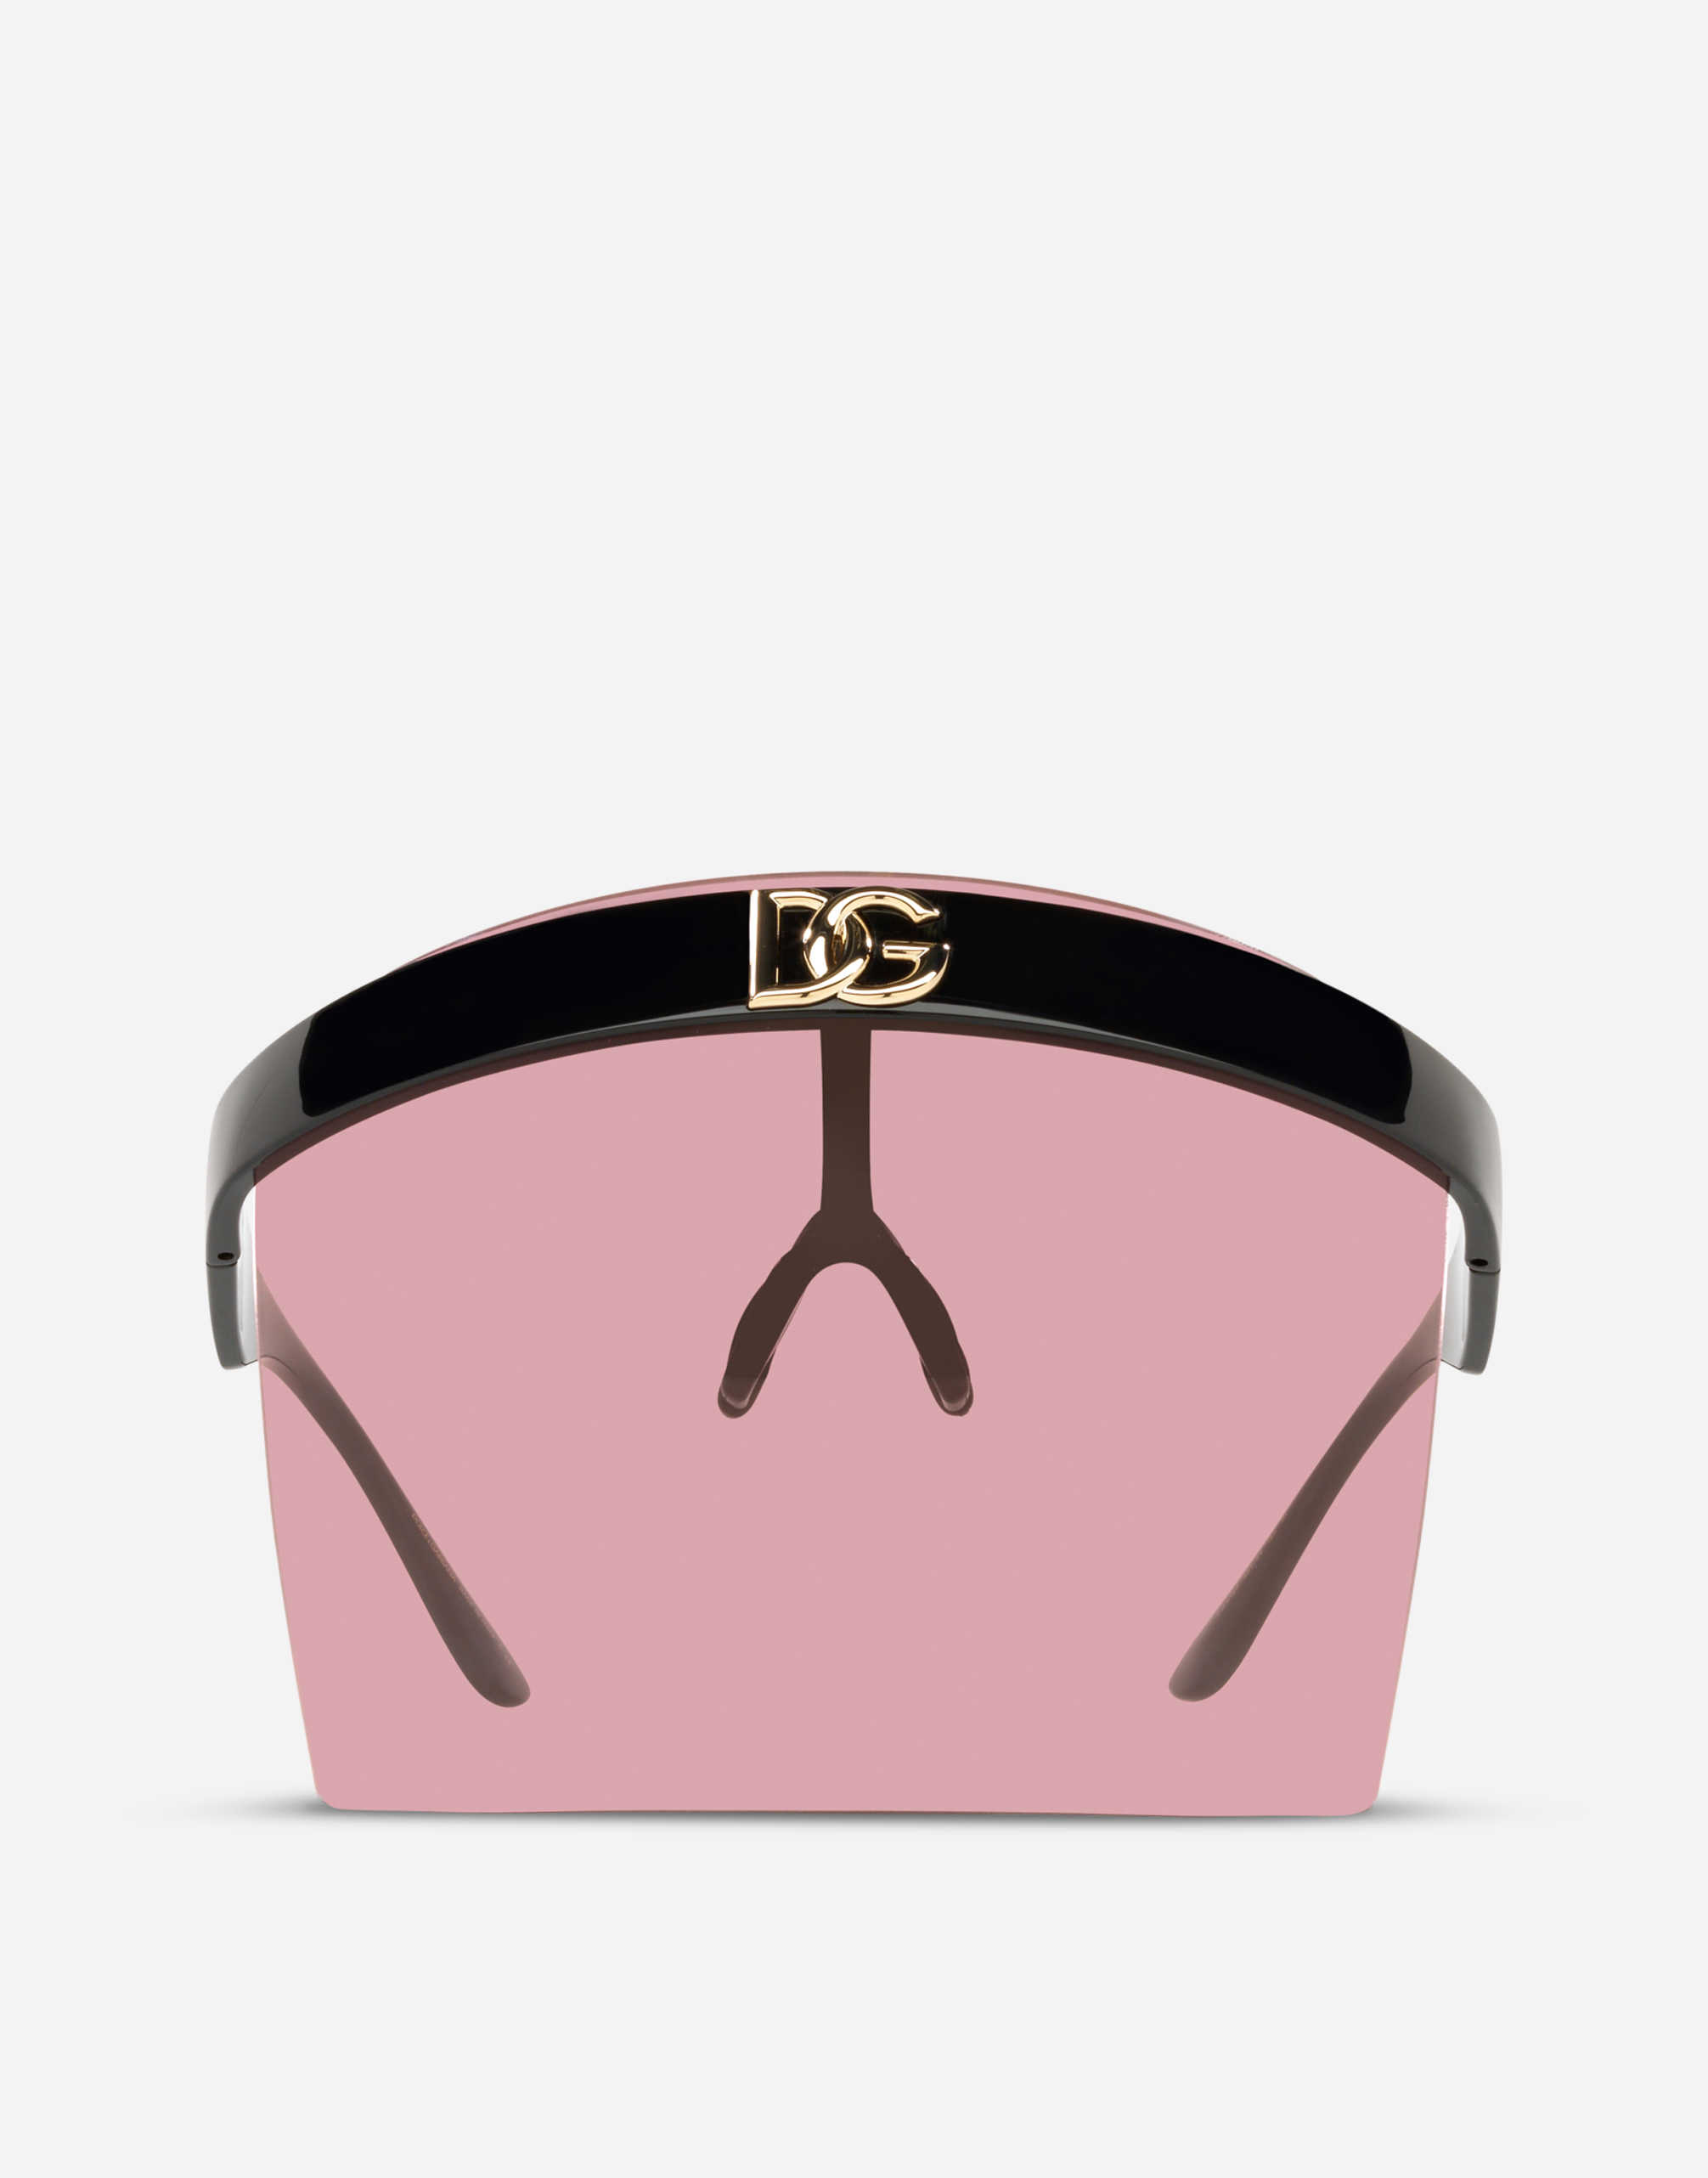 Geometric transparency sunglasses in Black and Pink